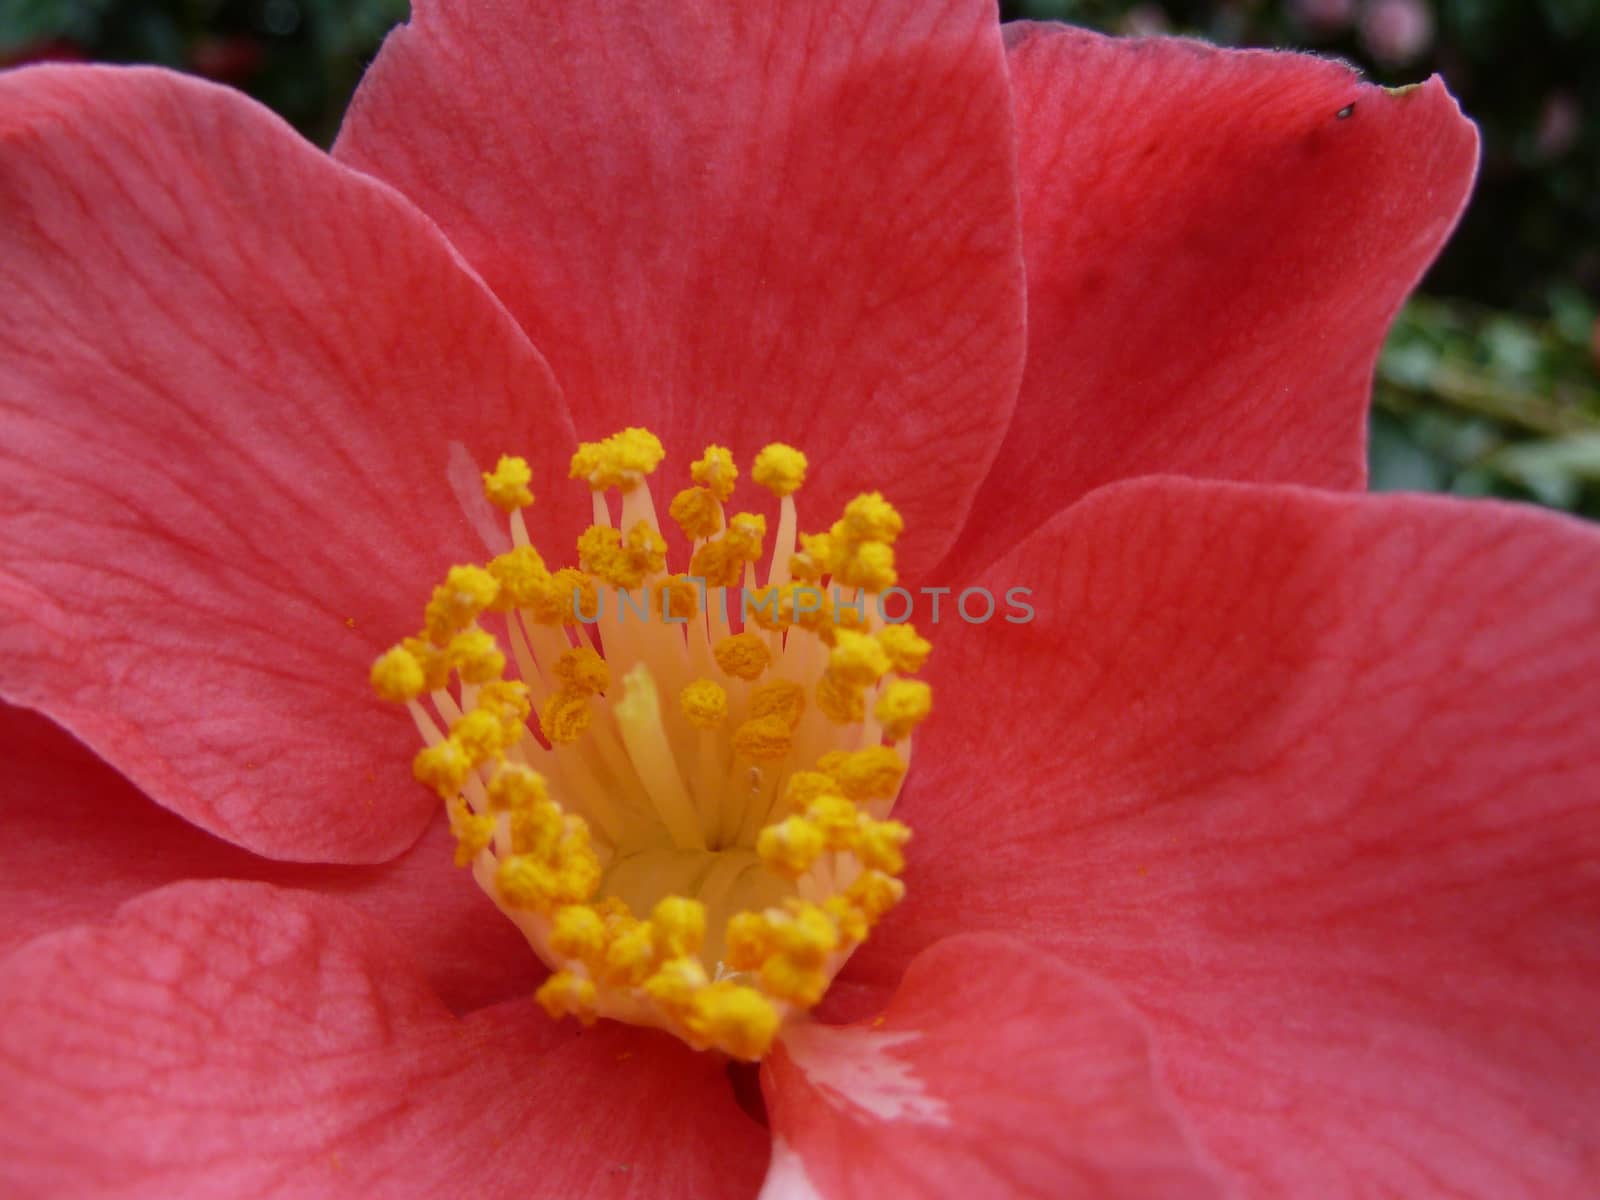 Yellow stamens at the centre of a pretty red flower